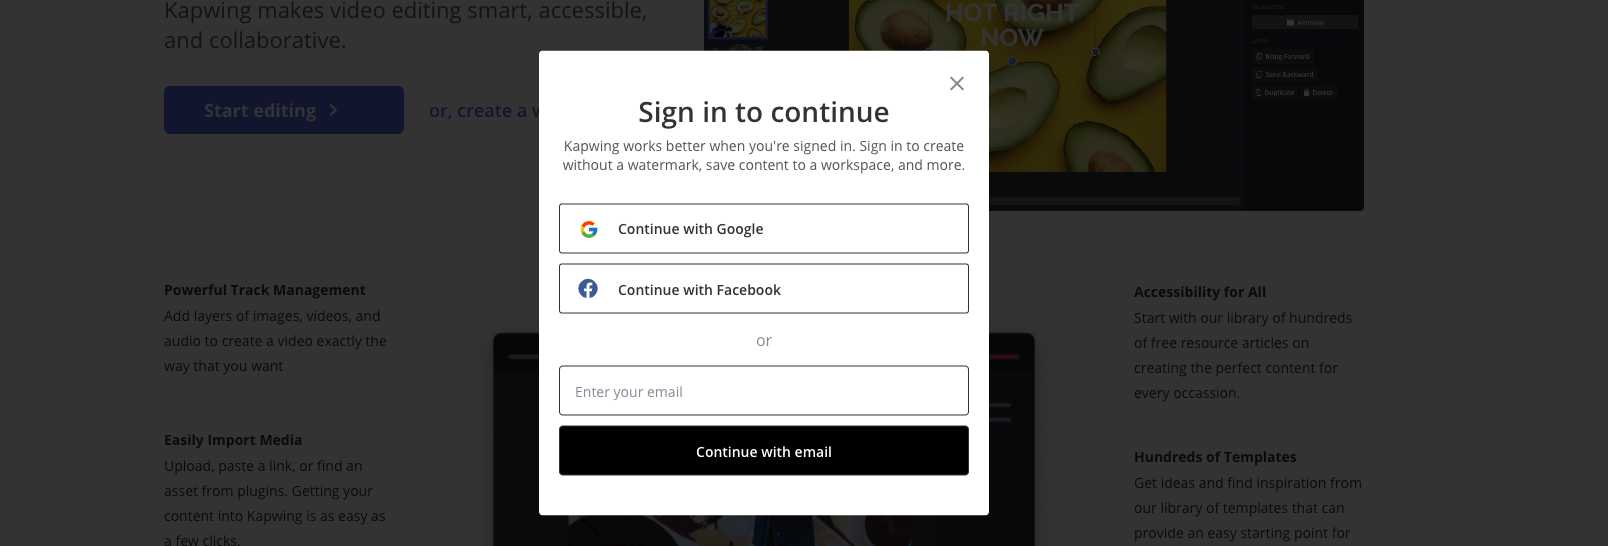 A sign in modal on the Kapwing landing page that offers users three ways to sign in, using Google, Facebook or their email address.